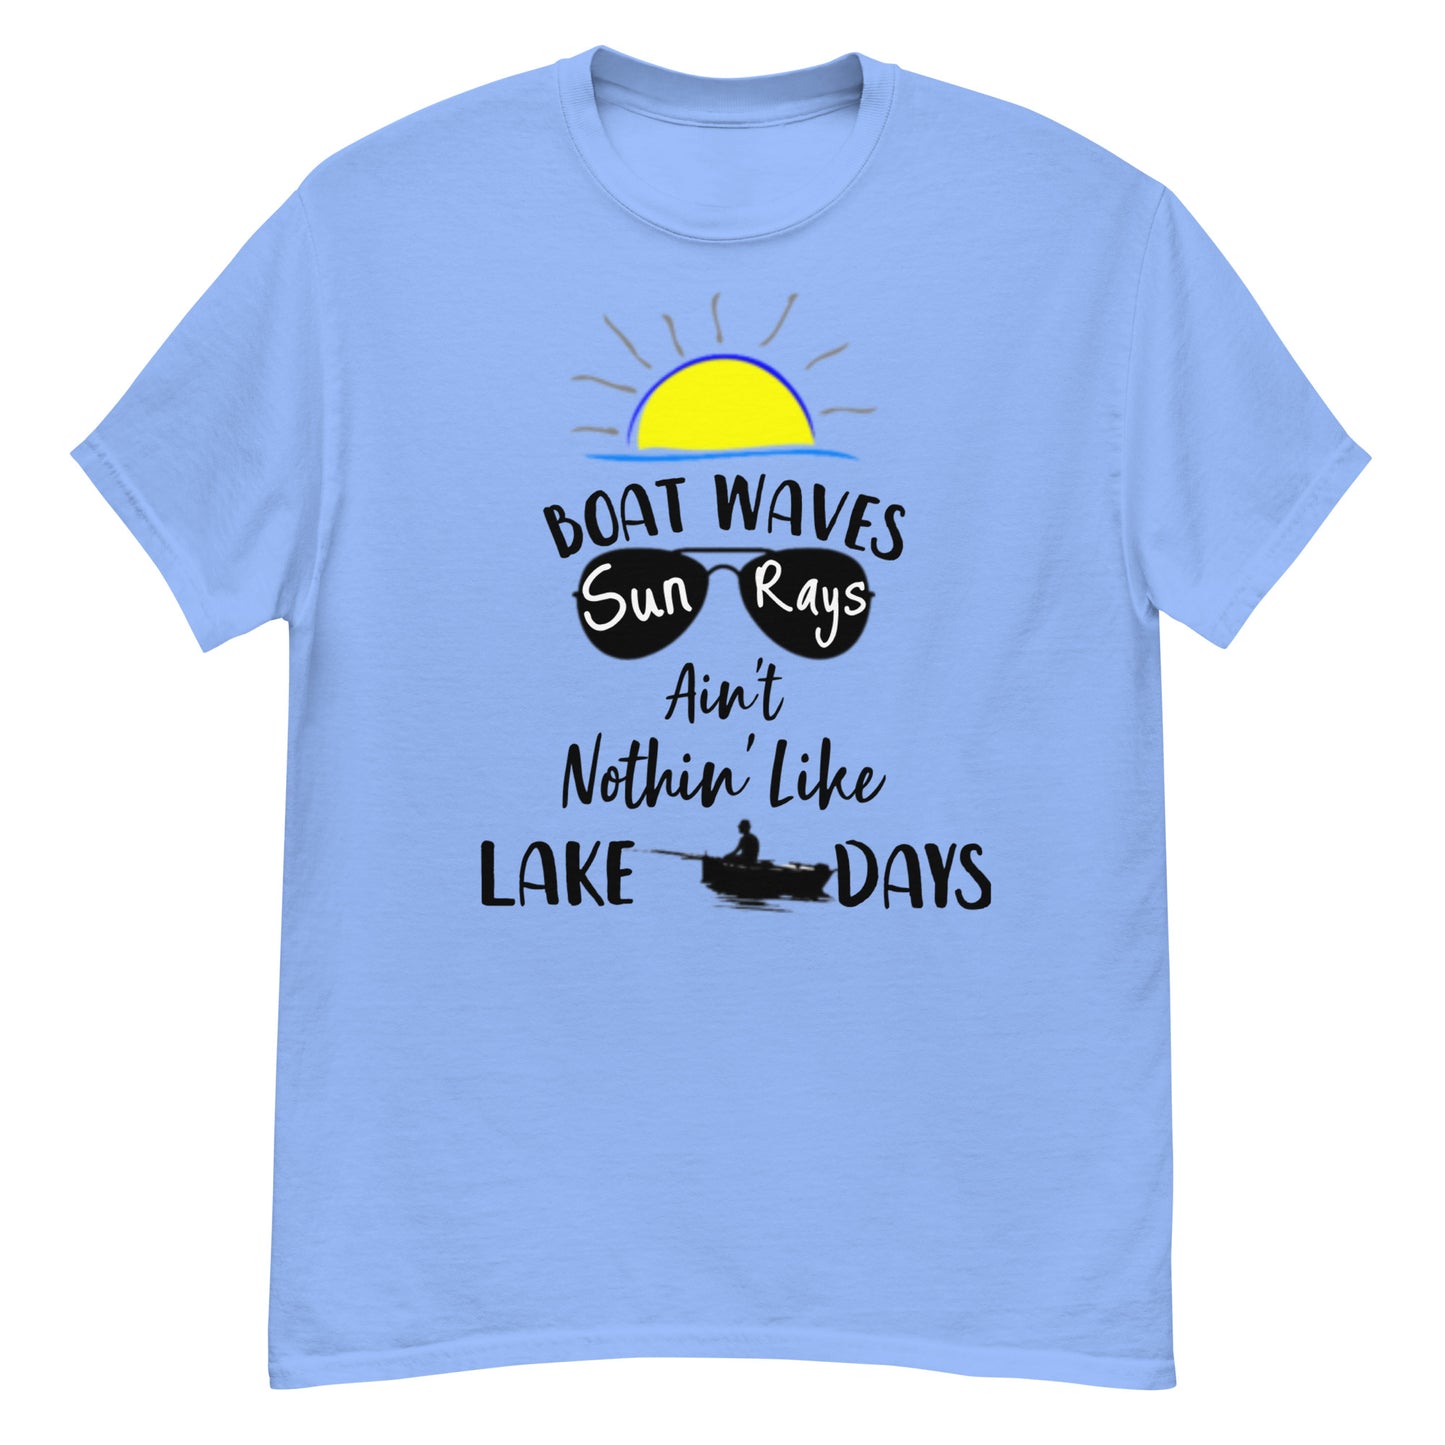 Boat Waves...Lake Days classic tee (with fishing boat)